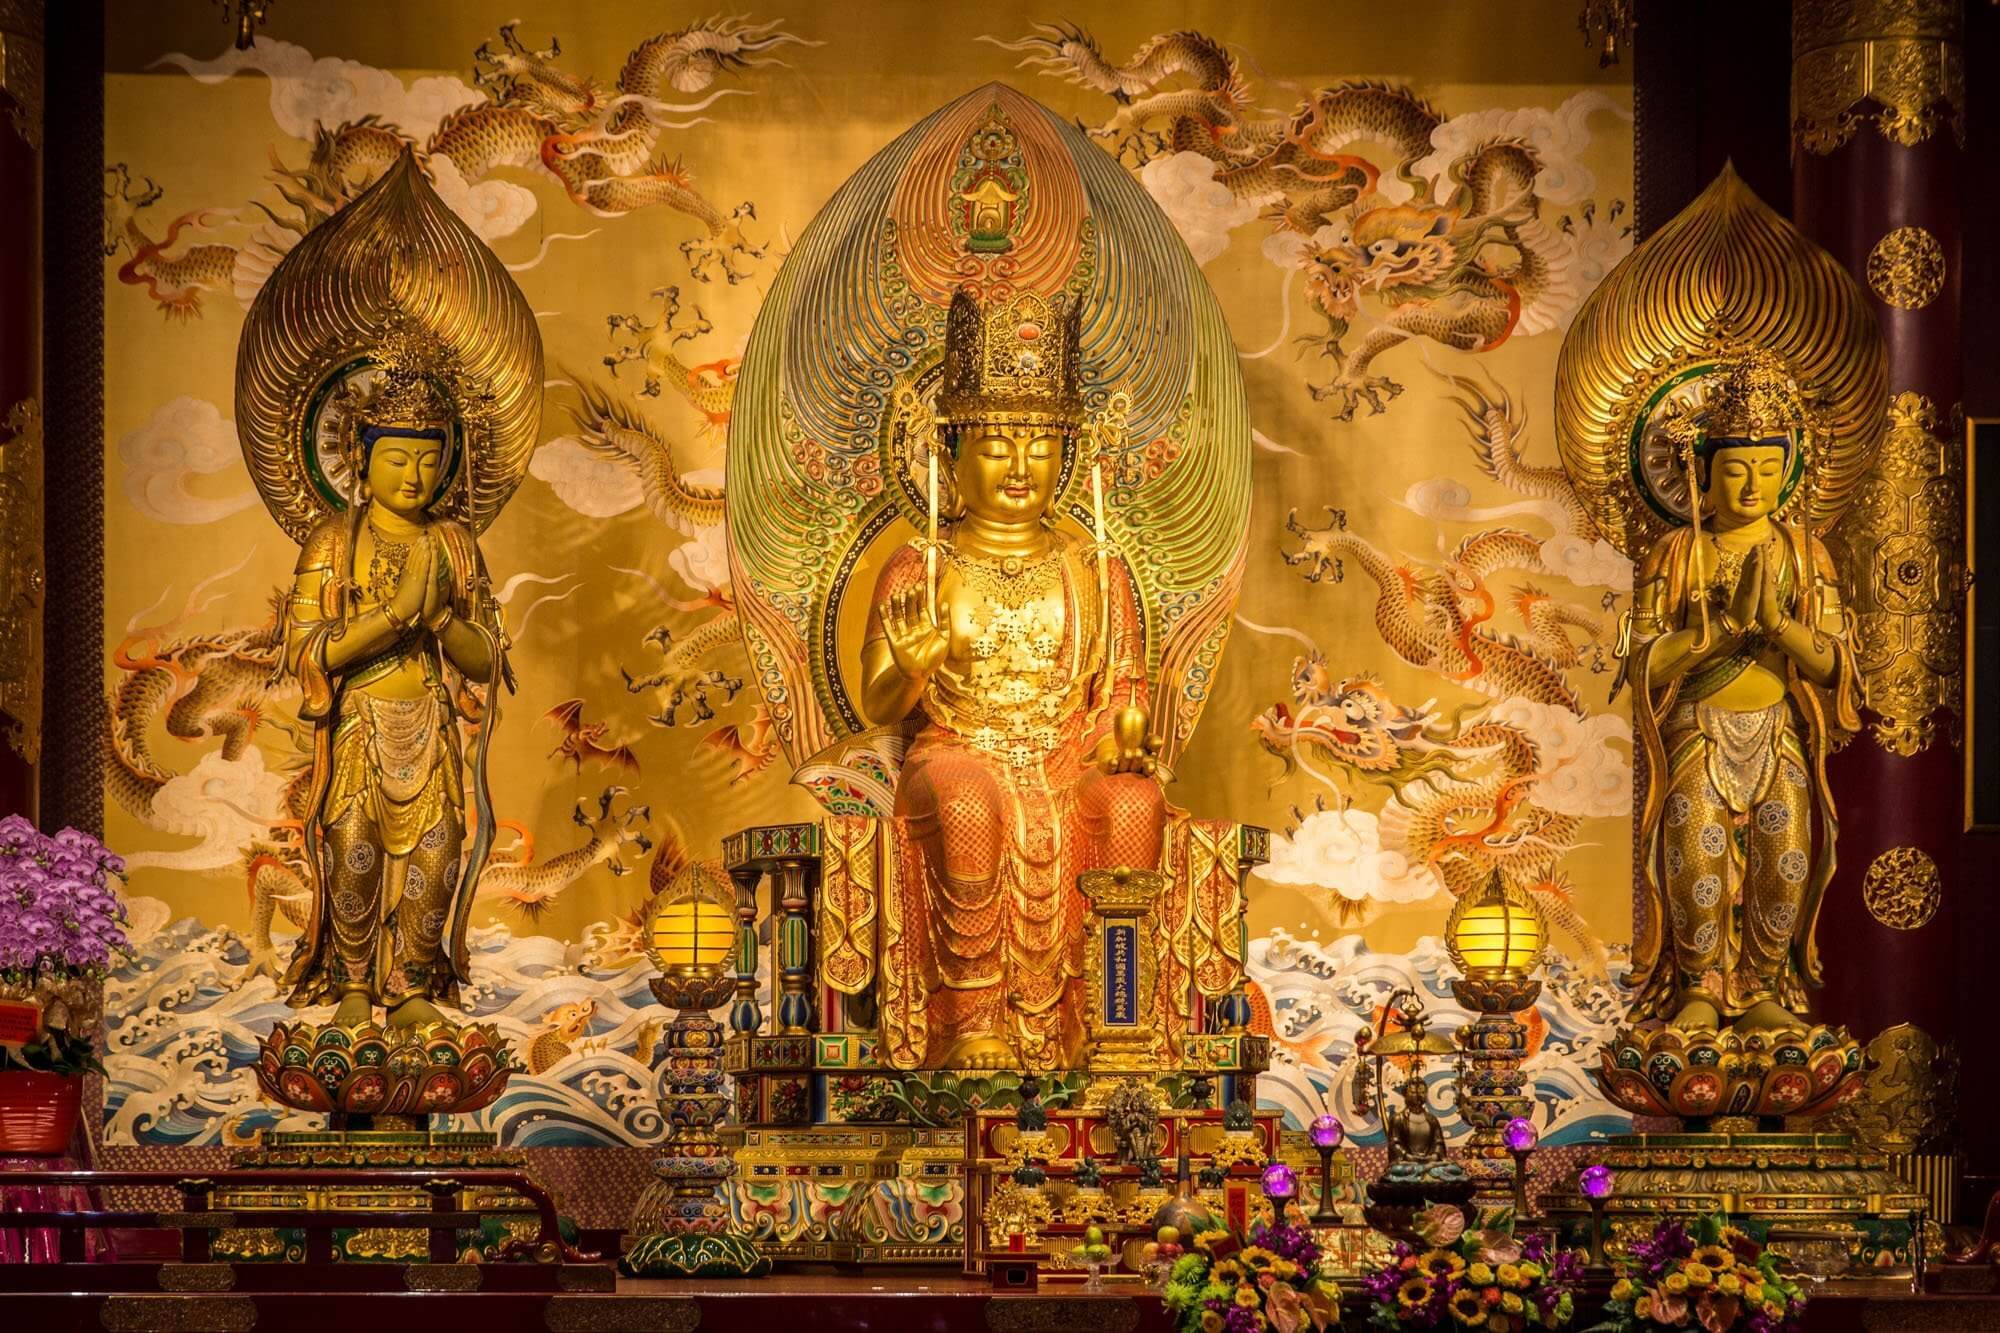 Buddha Maitreya flanked by two Bodhisattvas inside the Buddha Tooth Relic Temple in Singapore